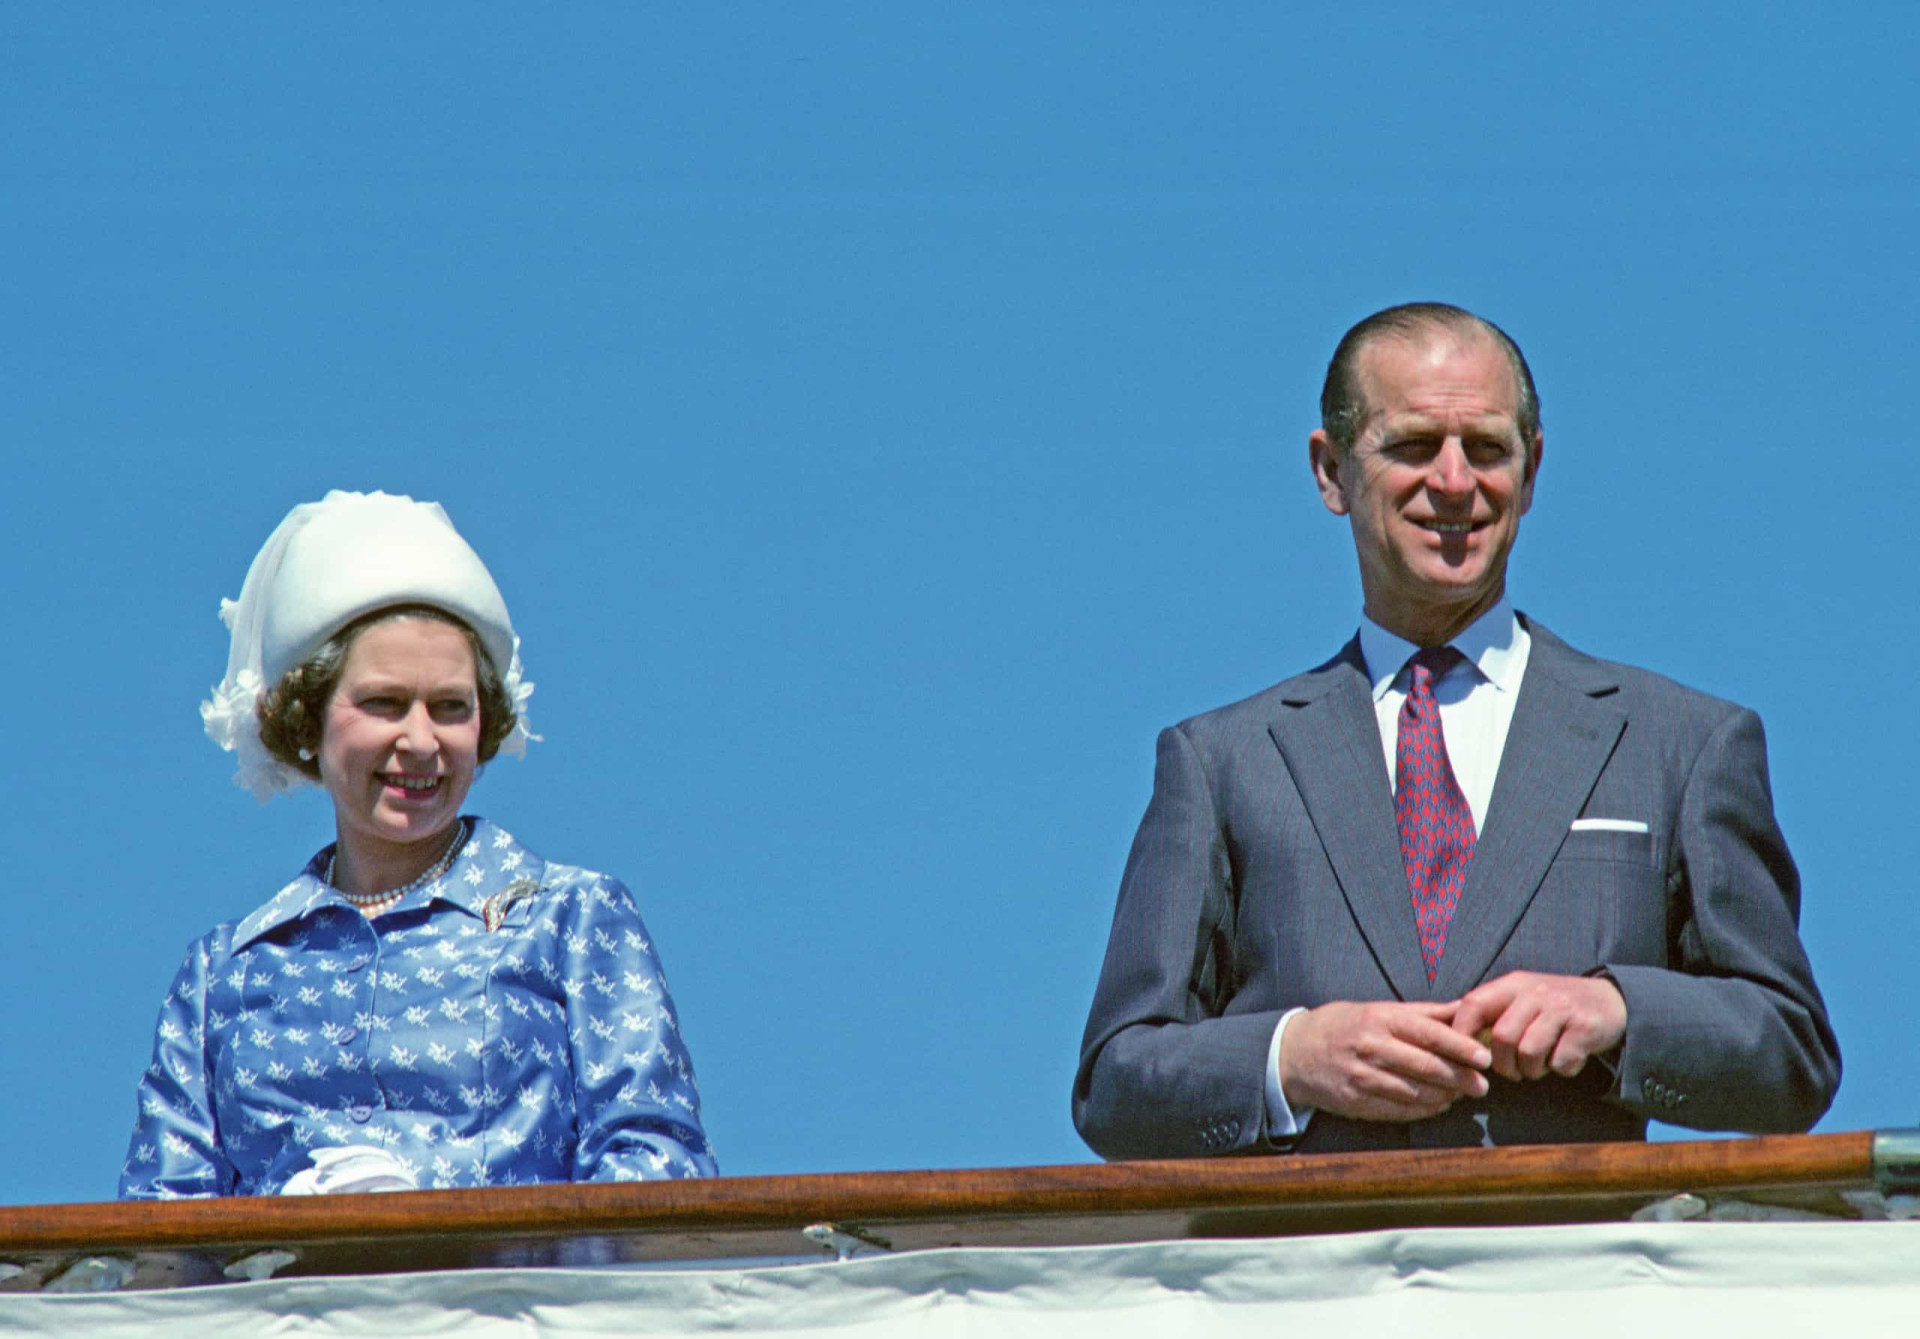 <p>A six-nation tour of the Gulf States, the first ever by a female Head of State, took place in early 1979. The Queen and Prince Philip flew into the region before setting sail from Kuwait aboard <em>Britannia</em>.</p><p><a href="https://www.msn.com/en-ph/community/channel/vid-7xx8mnucu55yw63we9va2gwr7uihbxwc68fxqp25x6tg4ftibpra?cvid=94631541bc0f4f89bfd59158d696ad7e">Follow us and access great exclusive content every day</a></p>